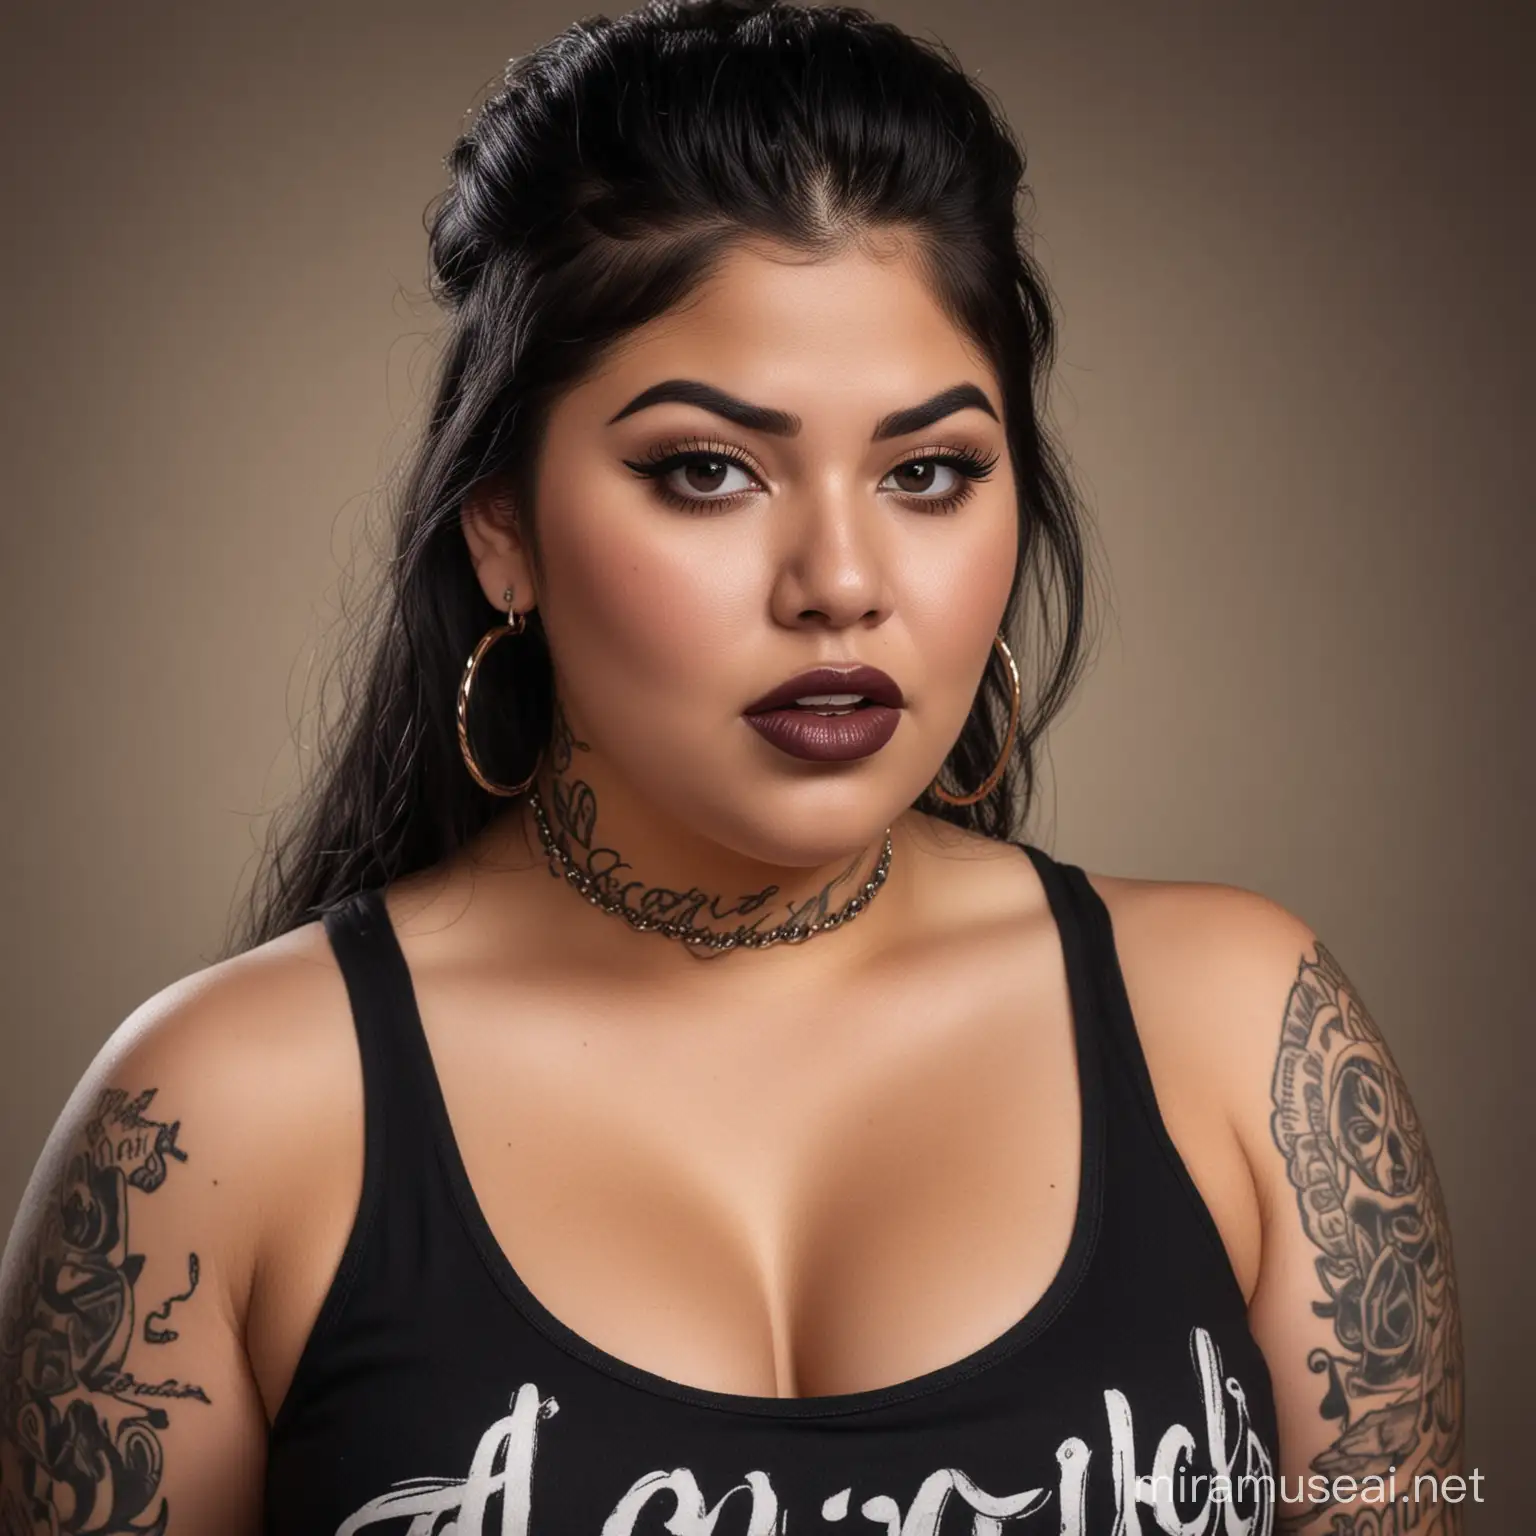 photo realistic, beautiful, obese, chubby, Mexican woman, black lipstick, hoop earrings, attitude expression, long black hair. tattoos, chola. black tank top. Snarl growl expression